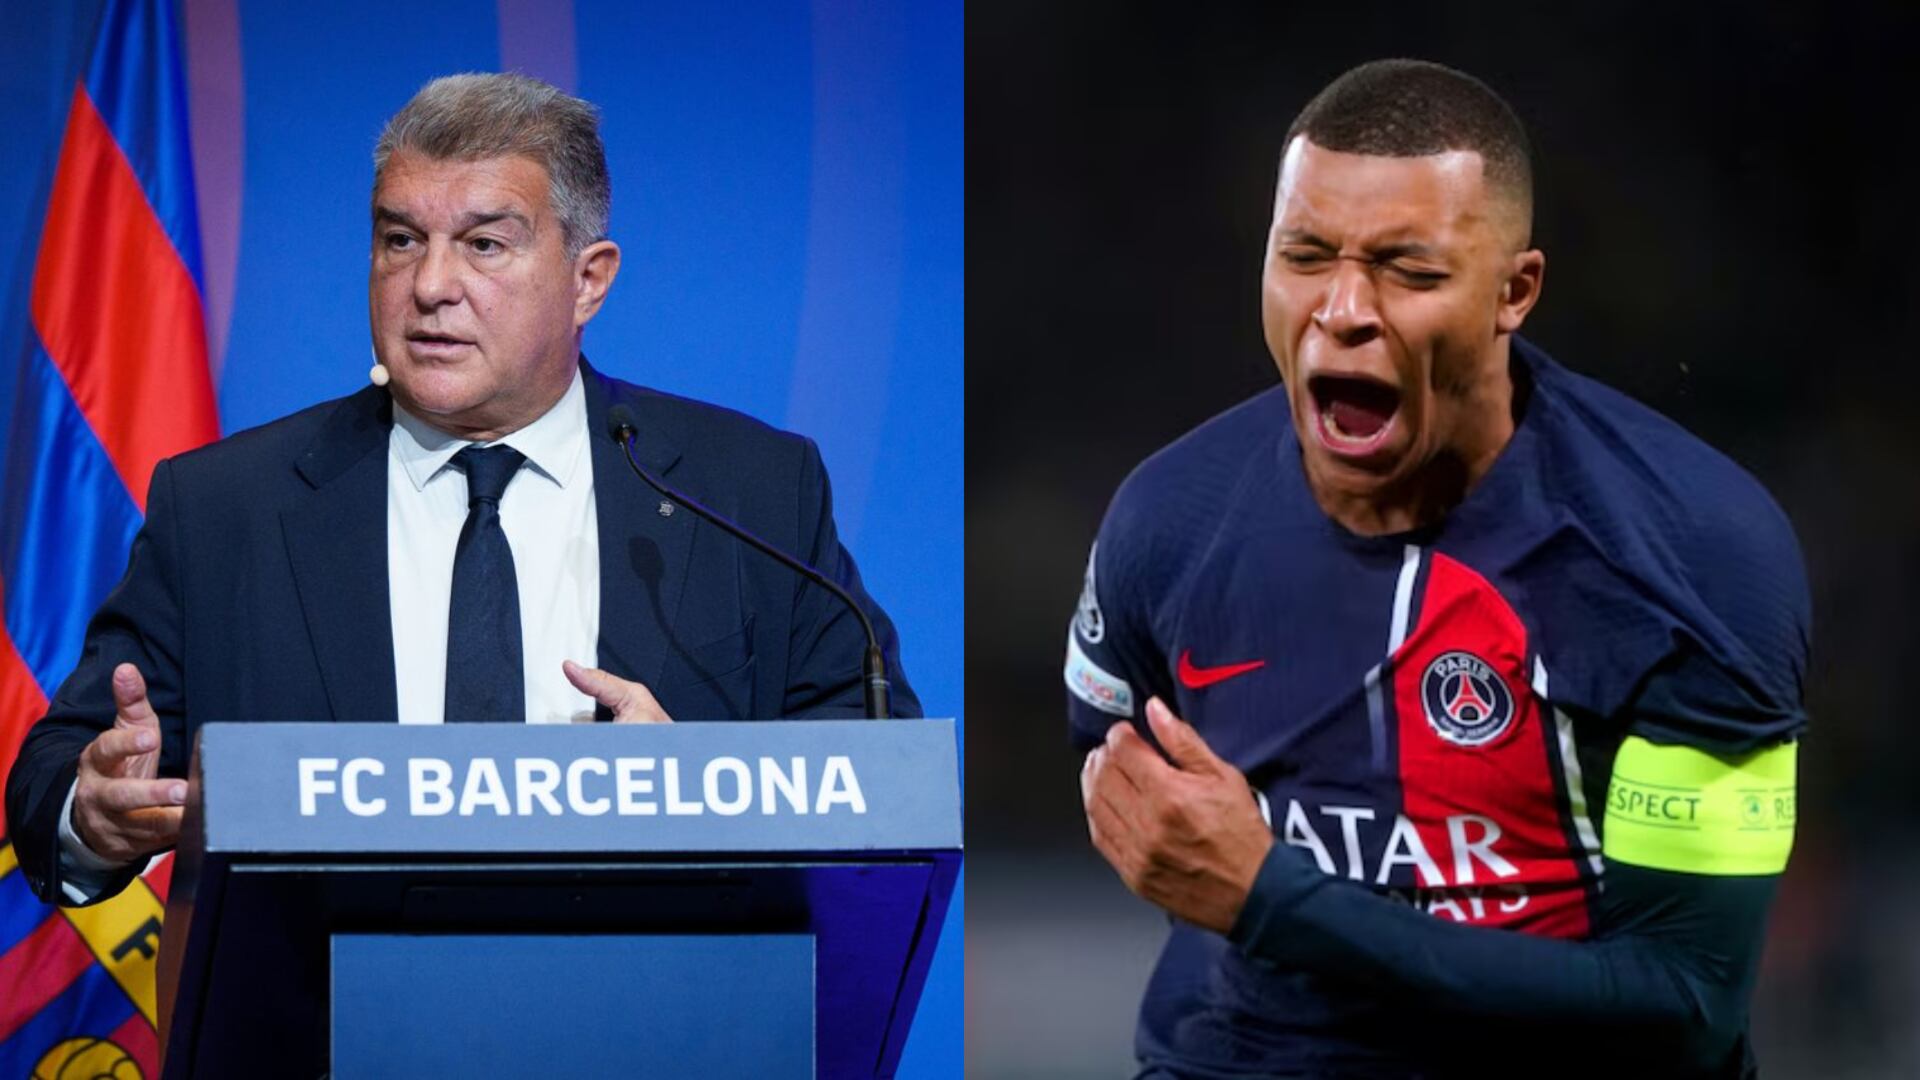 FC Barcelona's Laporta makes this bold statement about Mbappé and PSG players